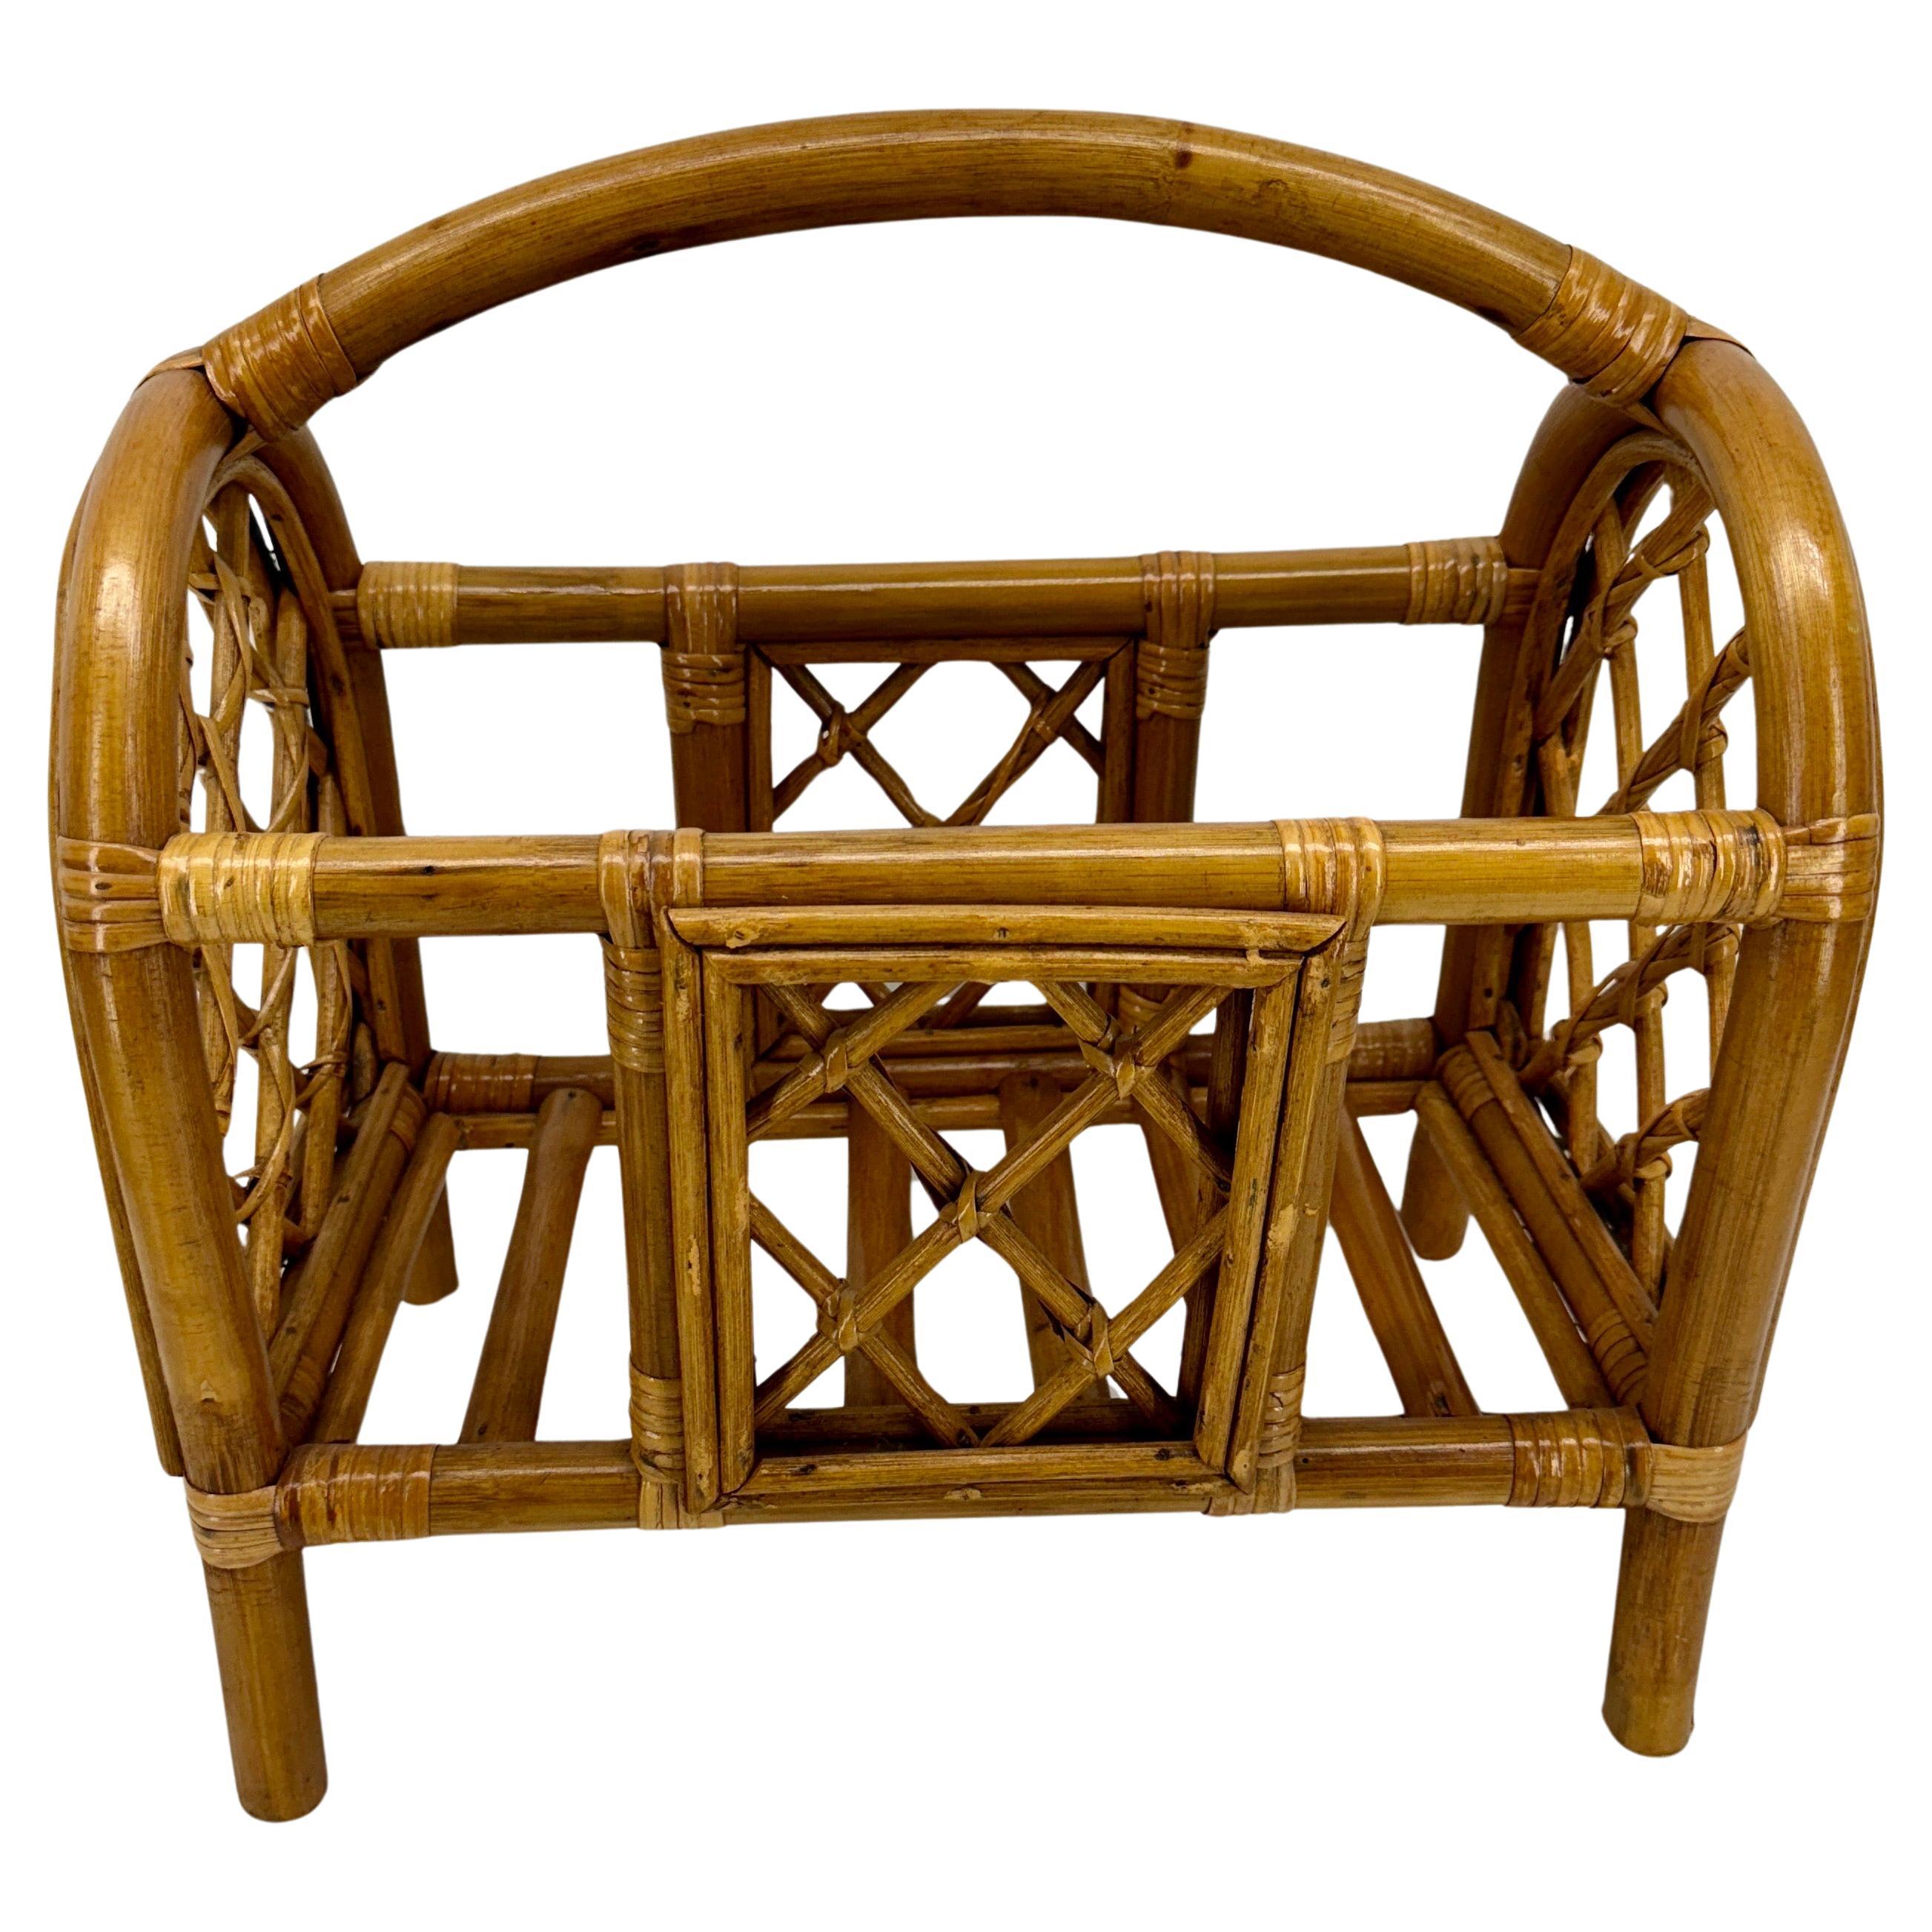 Hand-Crafted French Riviera Bamboo and Rattan Magazine Rack, Mid-Century Modern For Sale